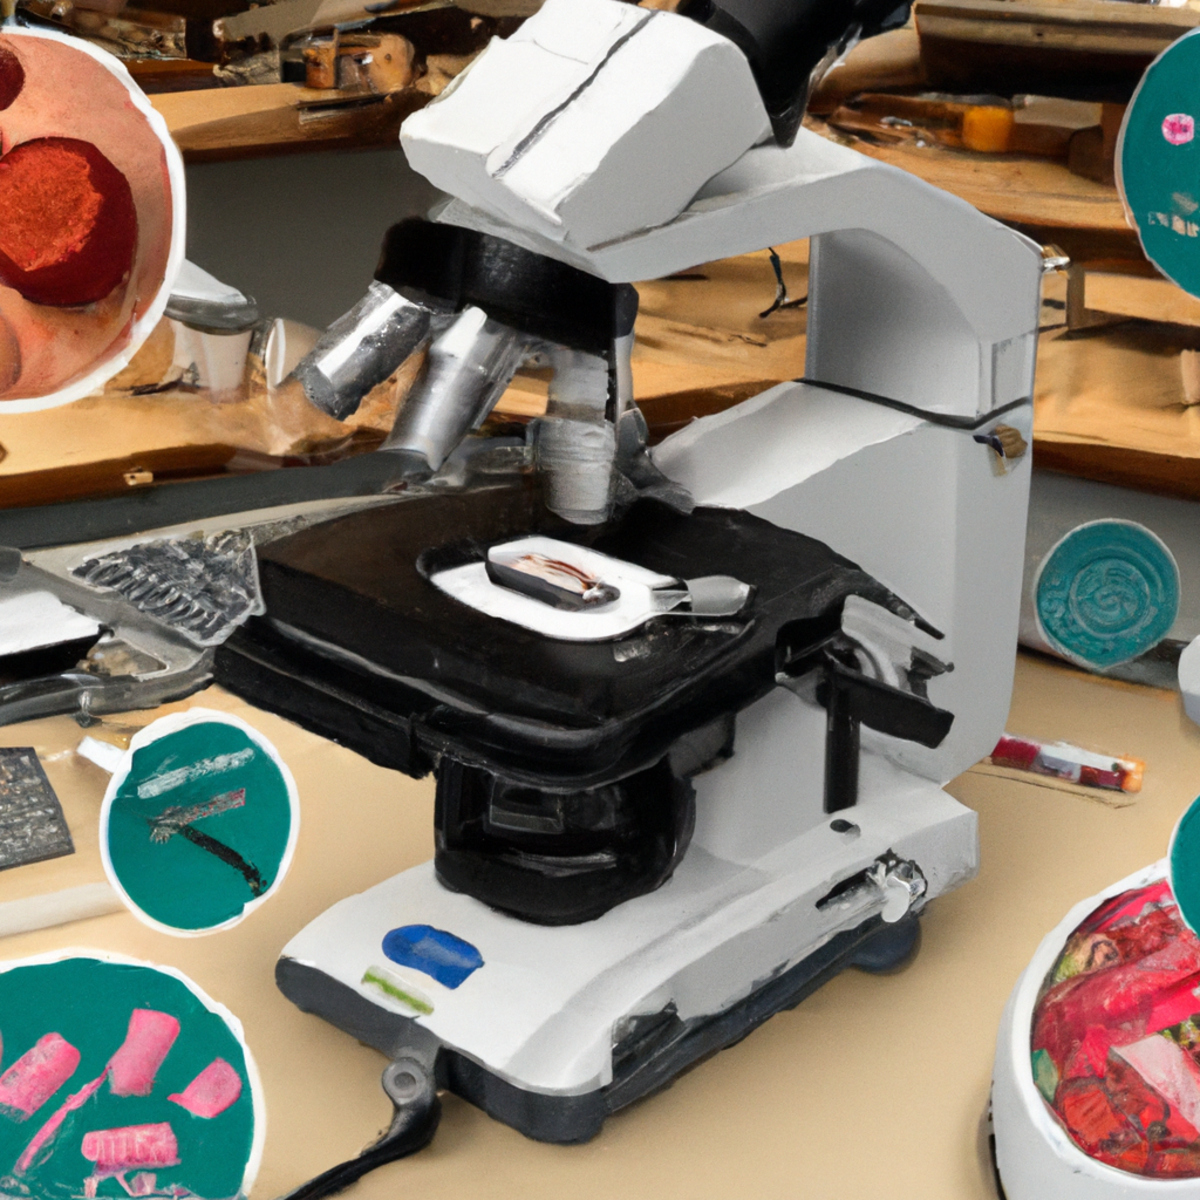 Lab setting with microscope, test tubes, petri dishes, computer screen, textbooks, and research papers for Primary Ciliary Dyskinesia (PCD) research.